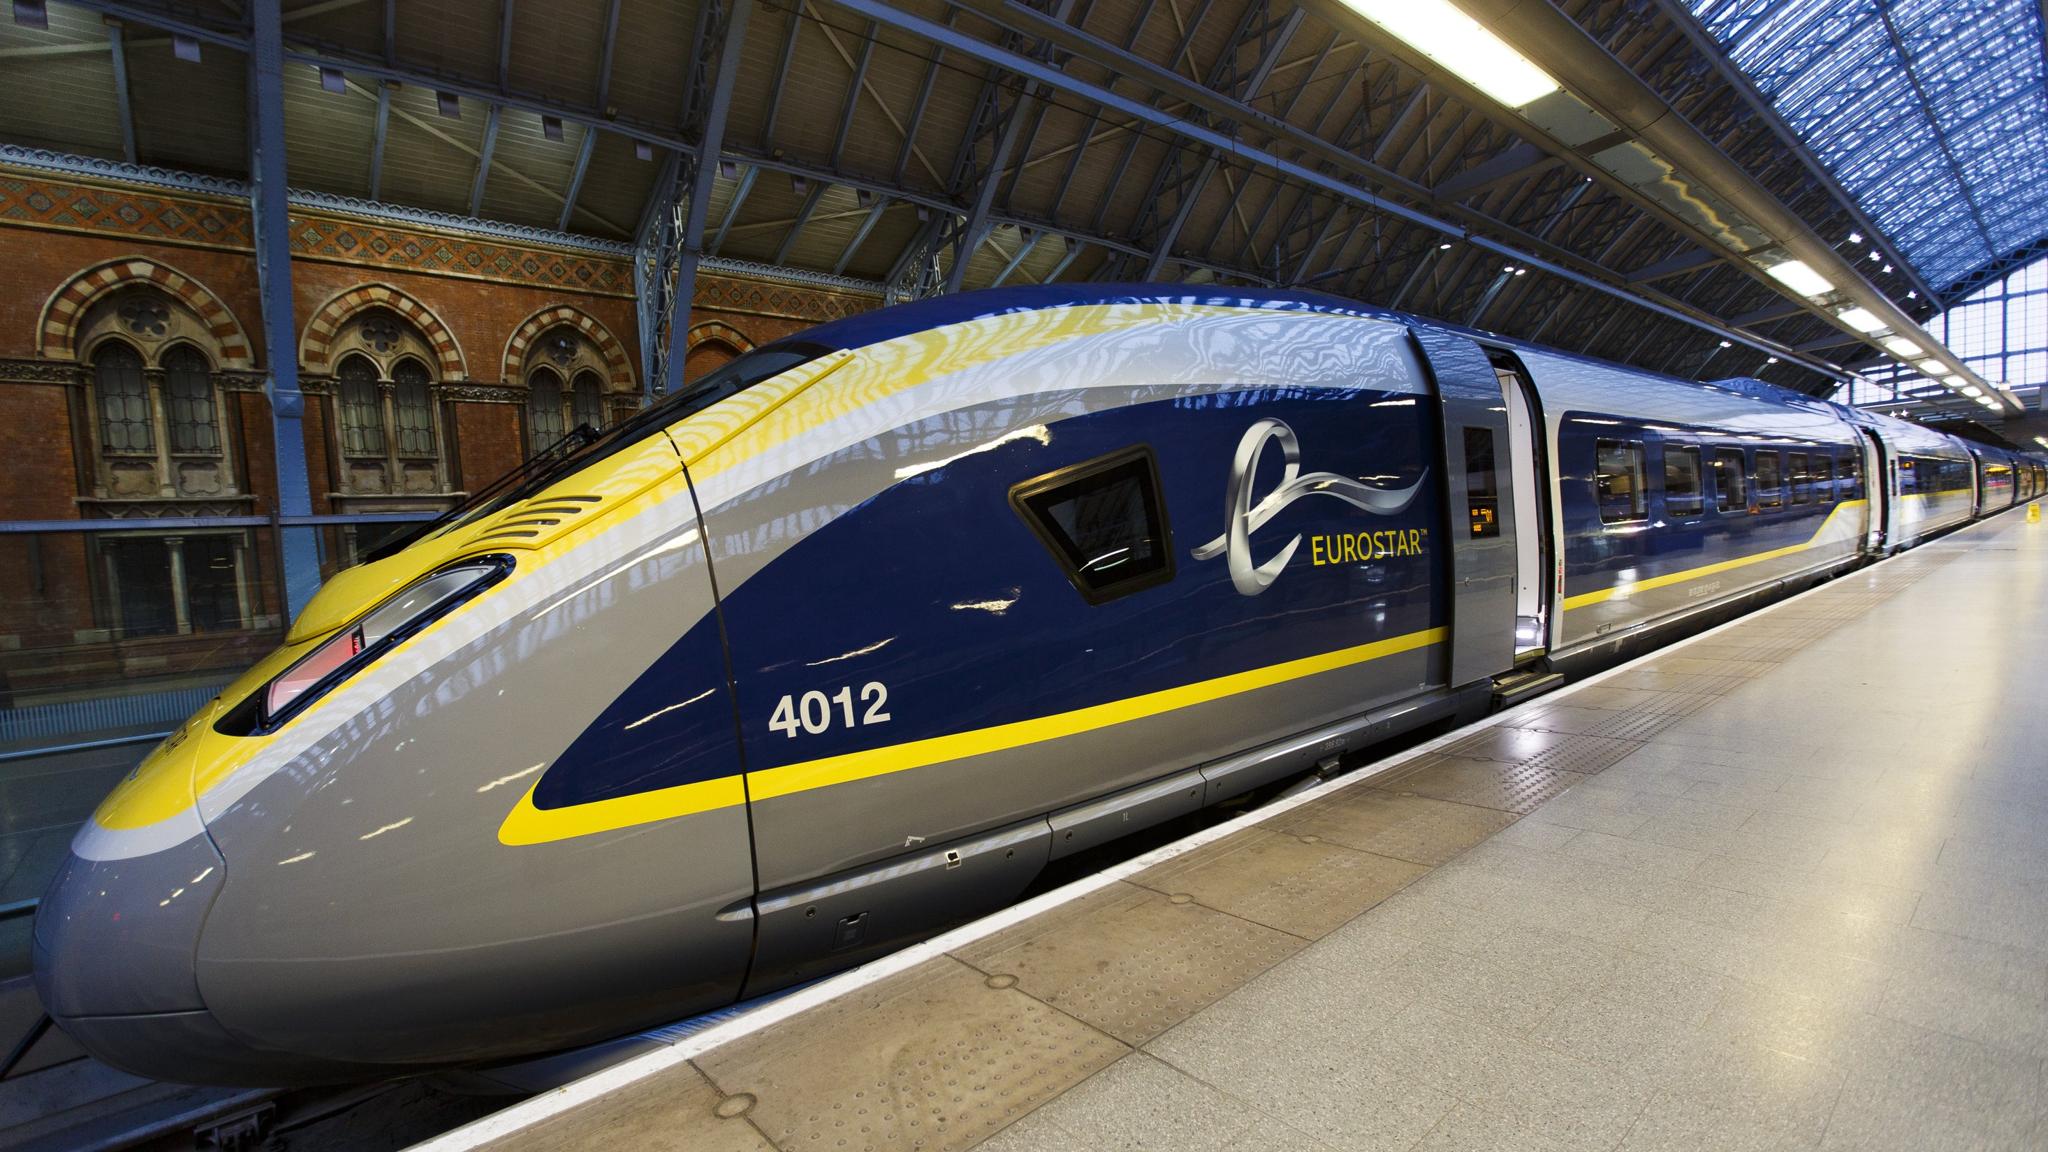 Mixed Blessings As Eurostar Rolls Out High Speed Stock Financial